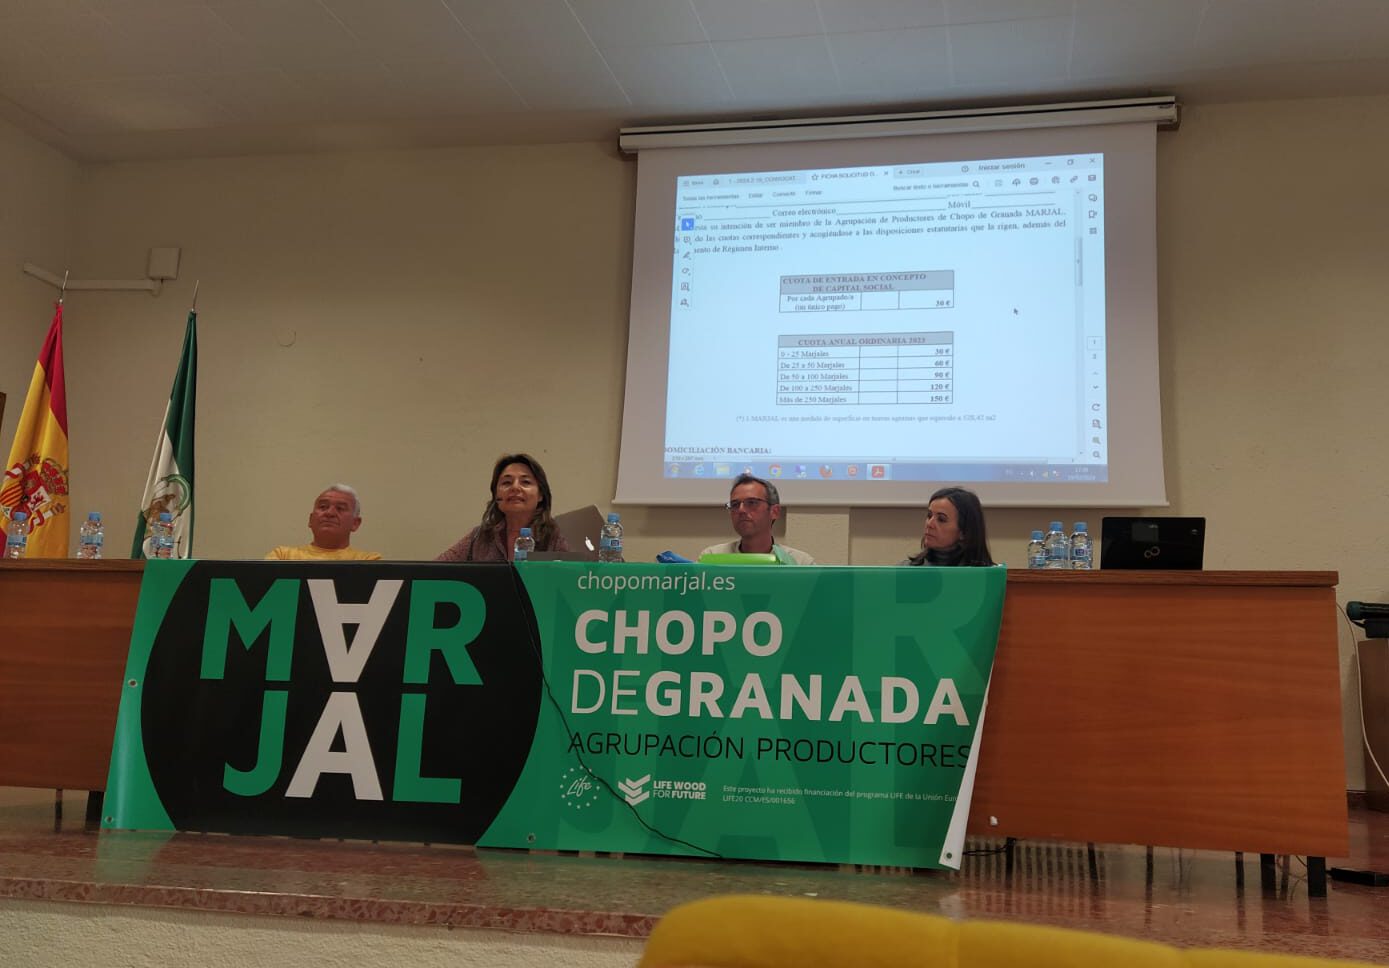 The Poplar Growers Association of Granada Marjal now has 100 members and more than 1,400 hectares under cultivation.